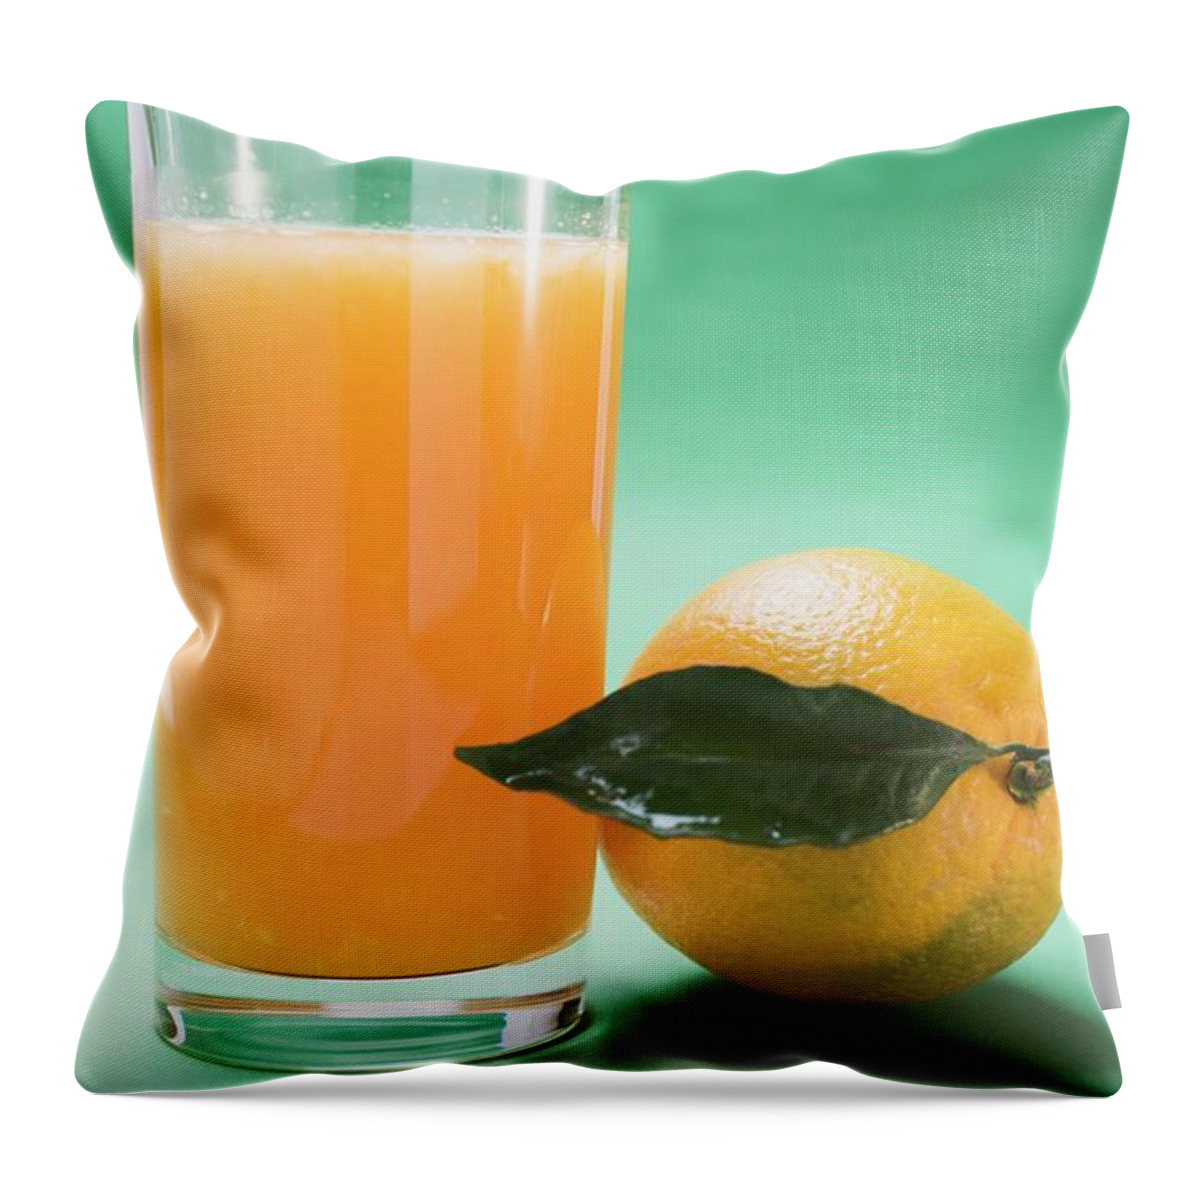 Alcohol Free Throw Pillow featuring the photograph Glass Of Orange Juice Beside Orange With Leaf by Foodcollection